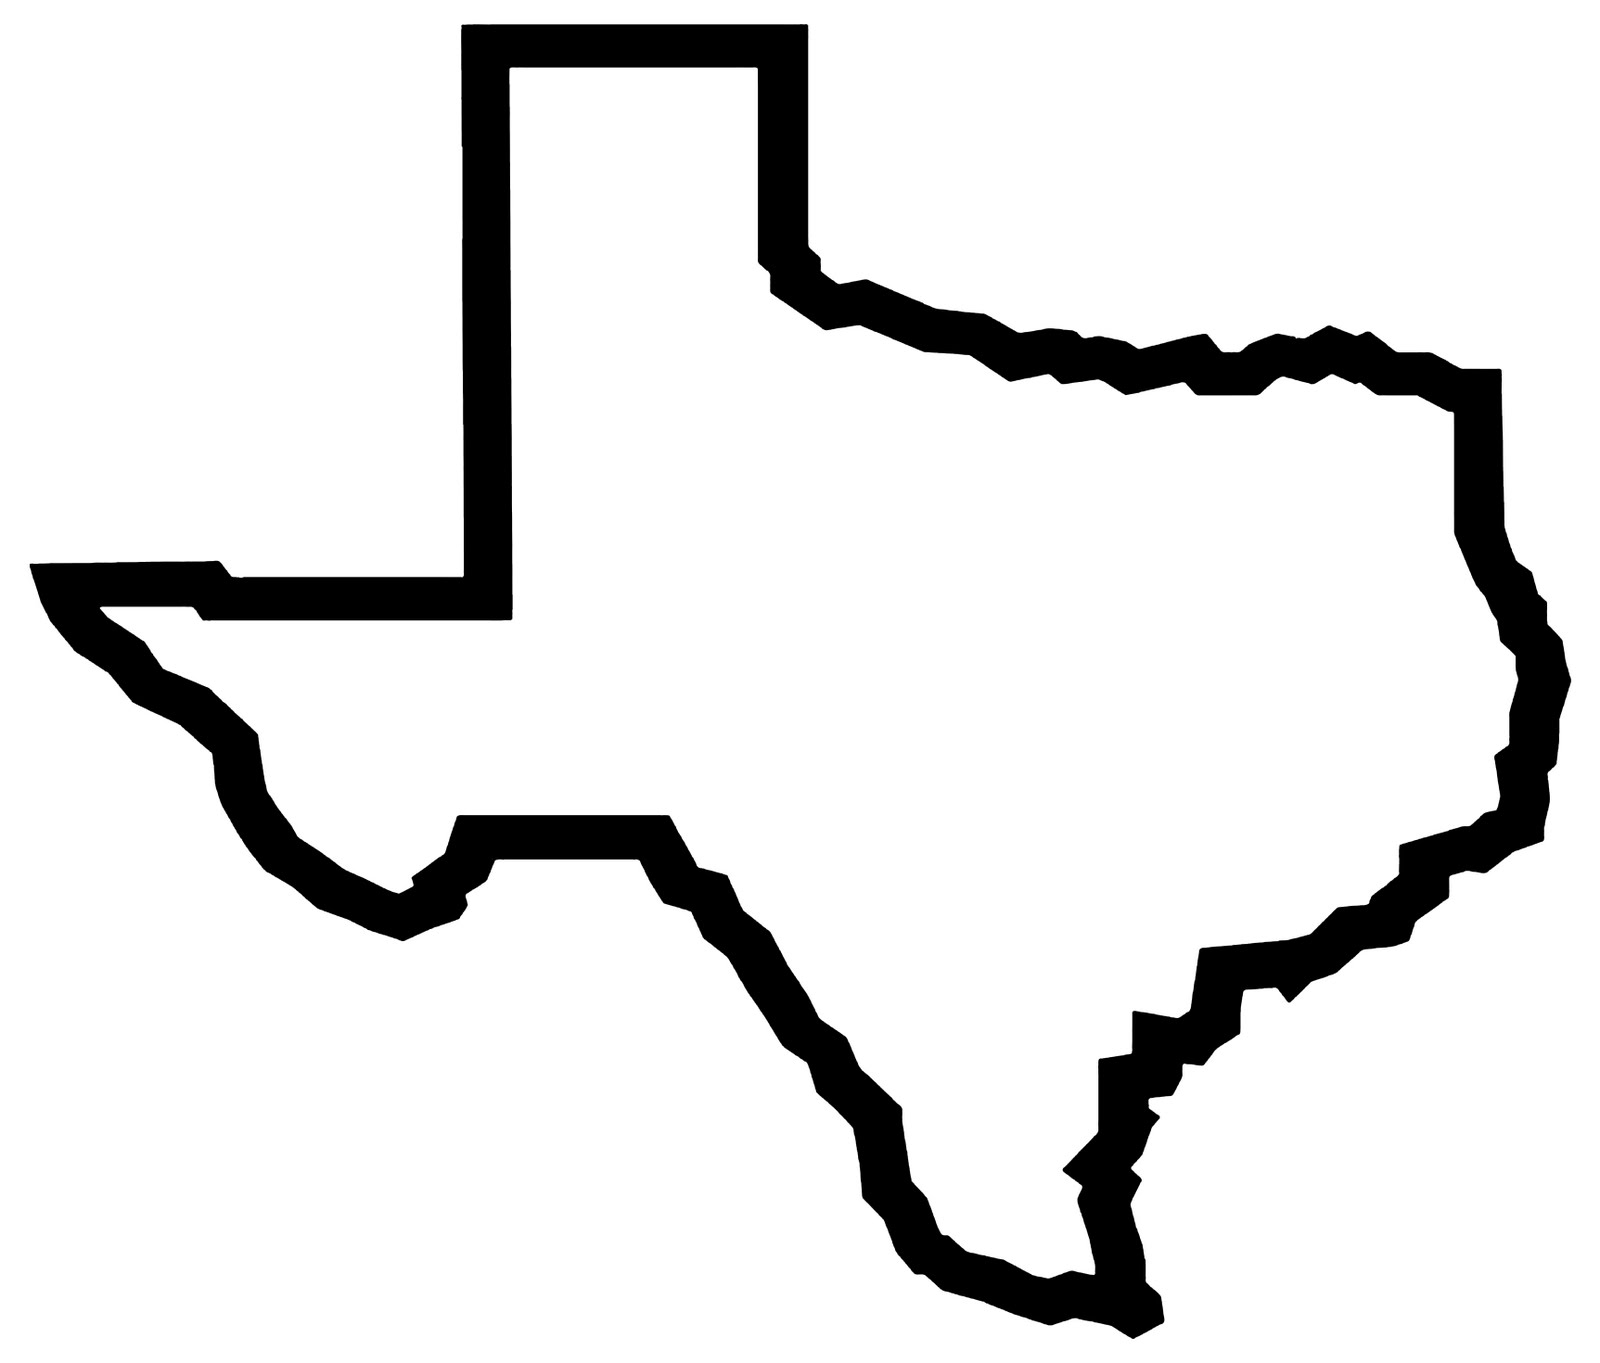 Two Texas Breweries Need Your Help! | DrinkLocalTexas.